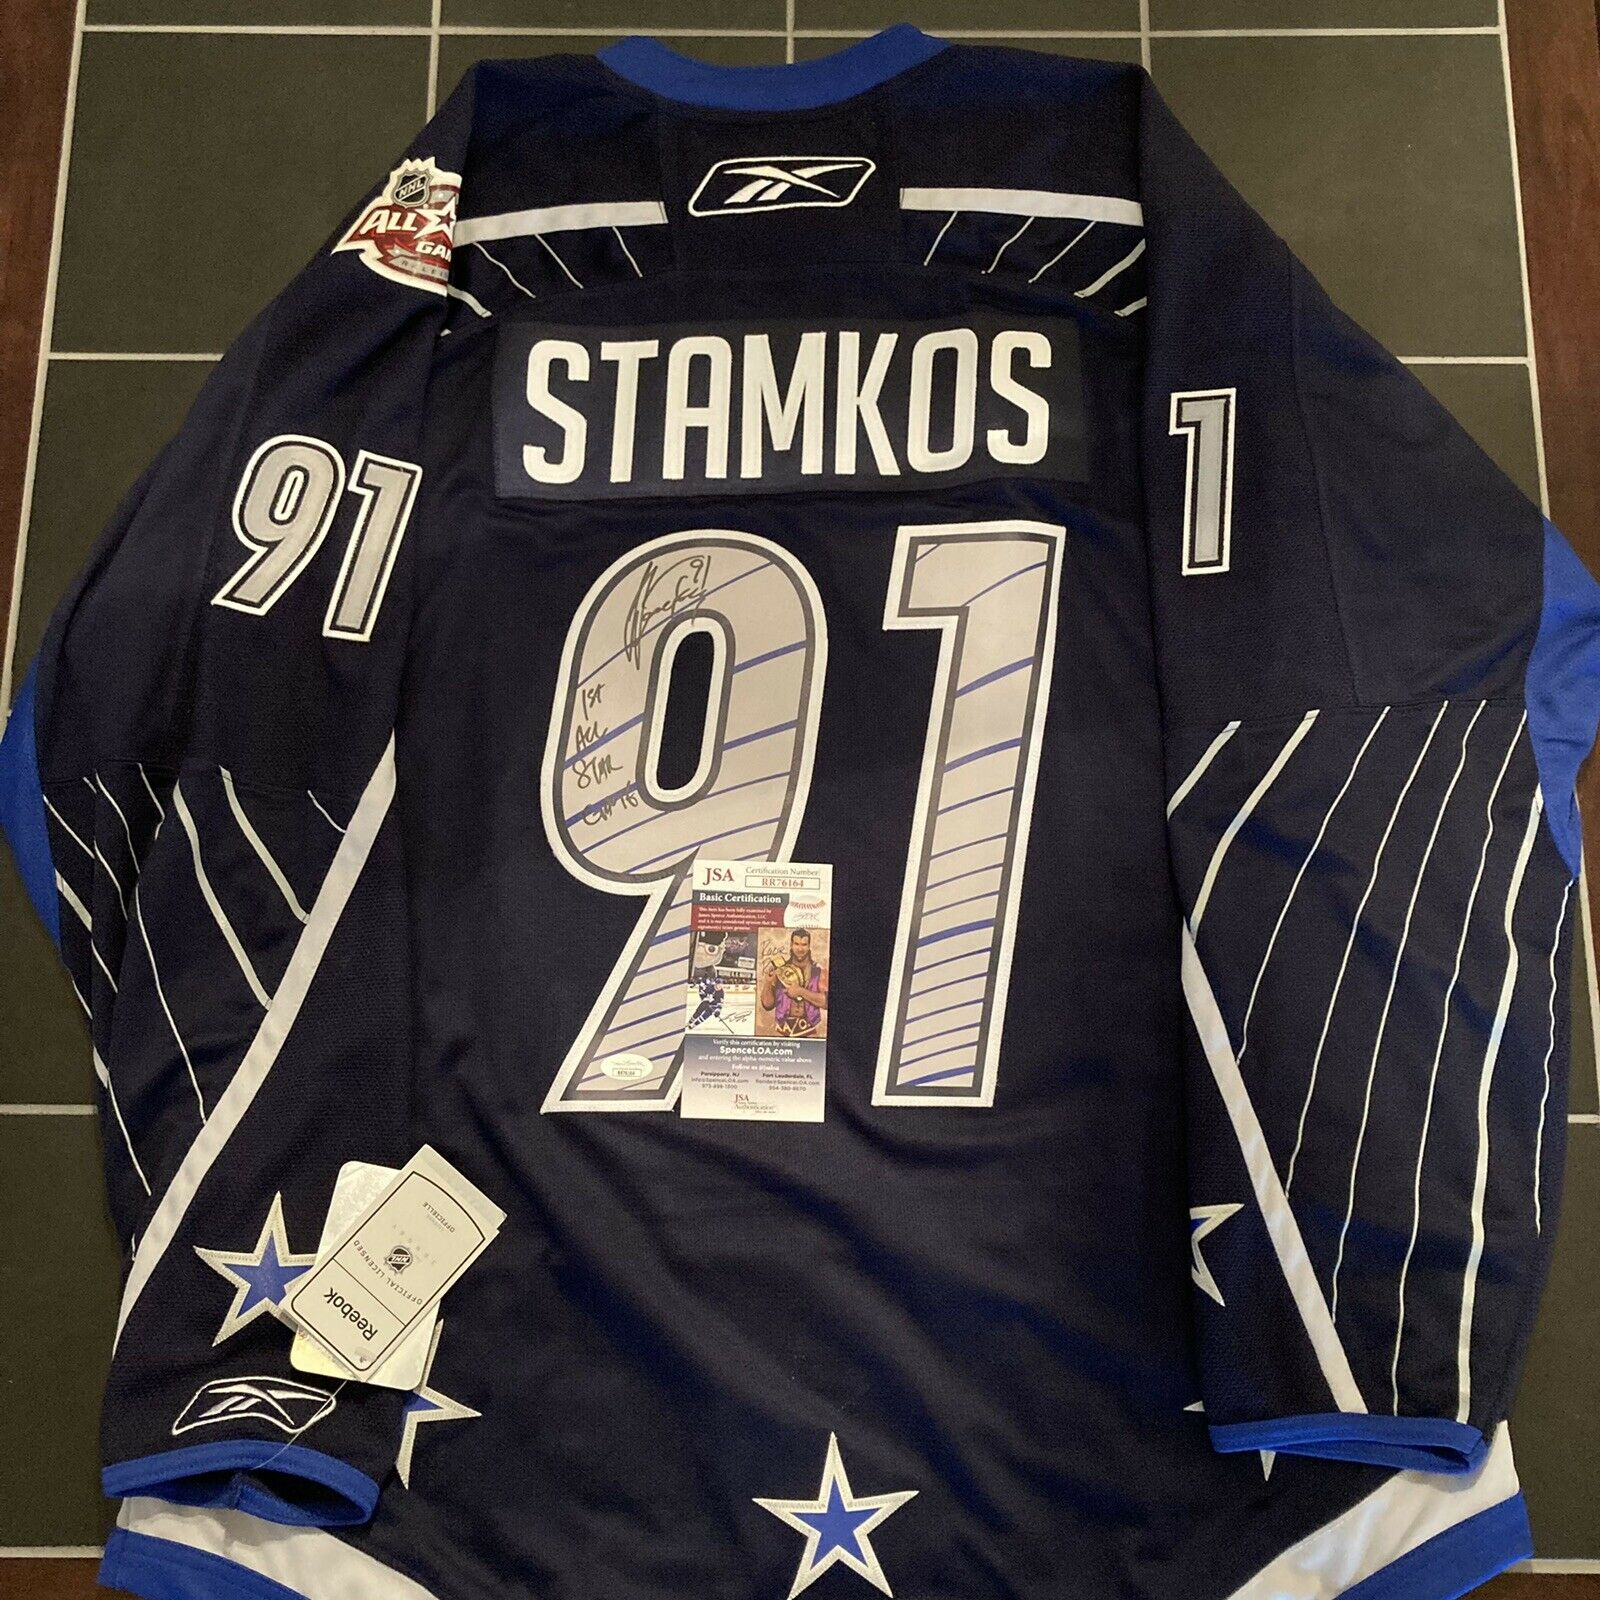 Steven Stamkos Signed 2014 All Star Authentic Jersey Auto “1st Asg” + Jsa Coa